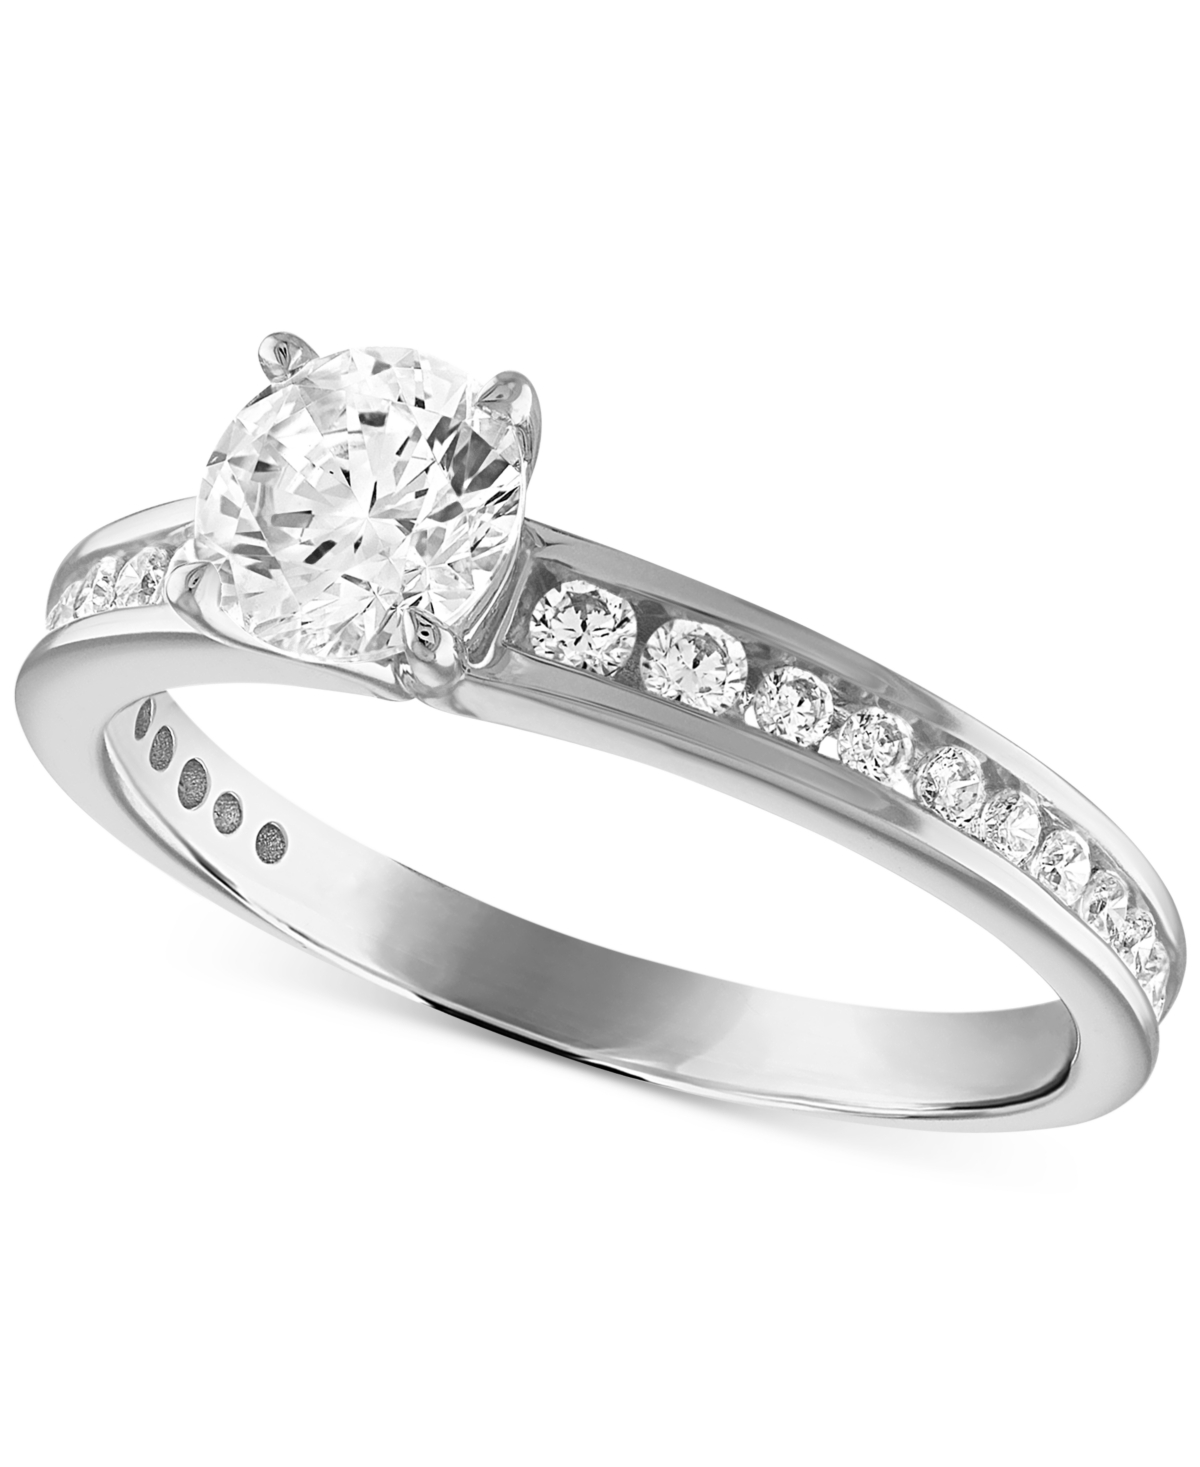 Certified Diamond Channel-Set Engagement Ring (1 ct. t.w.) in 14k White Gold featuring diamonds with the De Beers Code of Origin, Created for